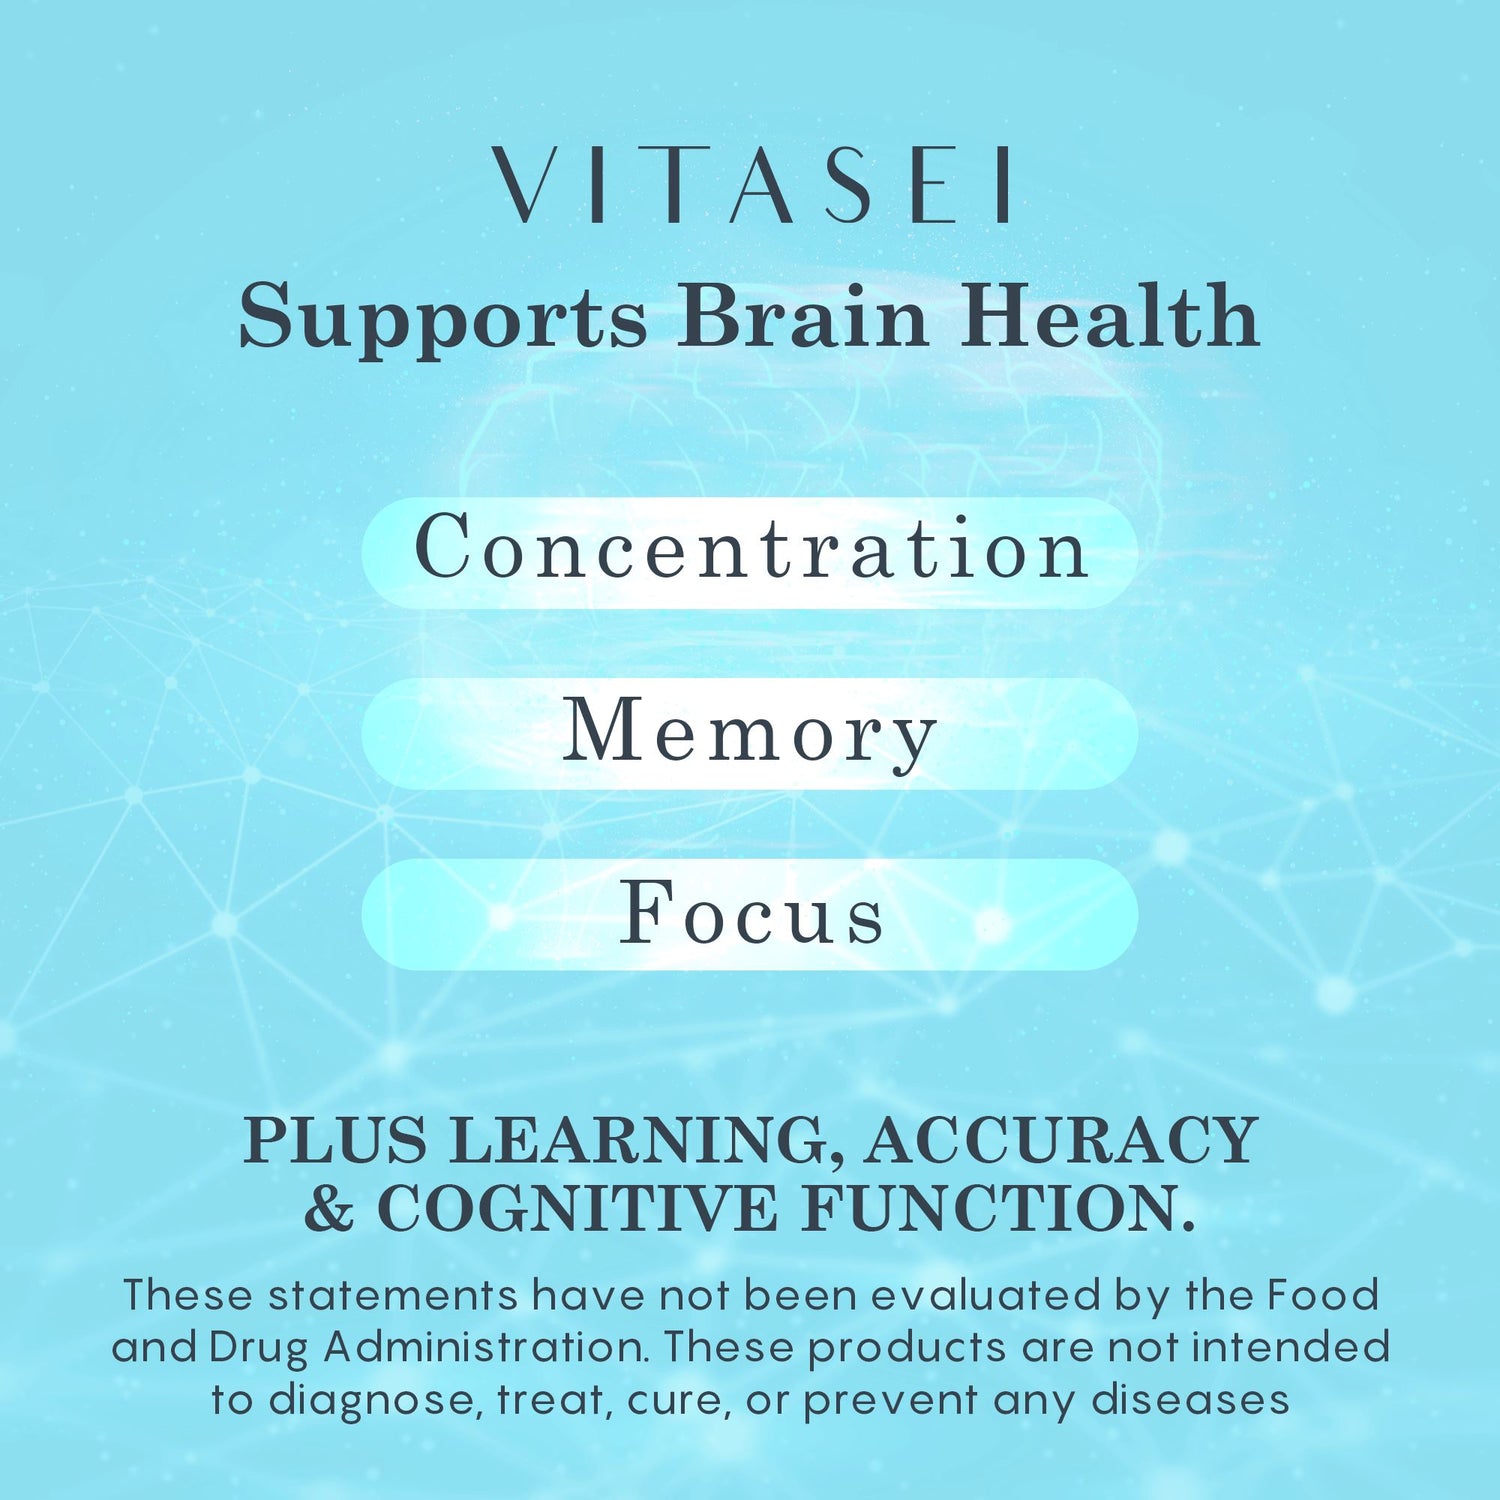 IQ COMPLEX AM VITALITY AND FOCUS